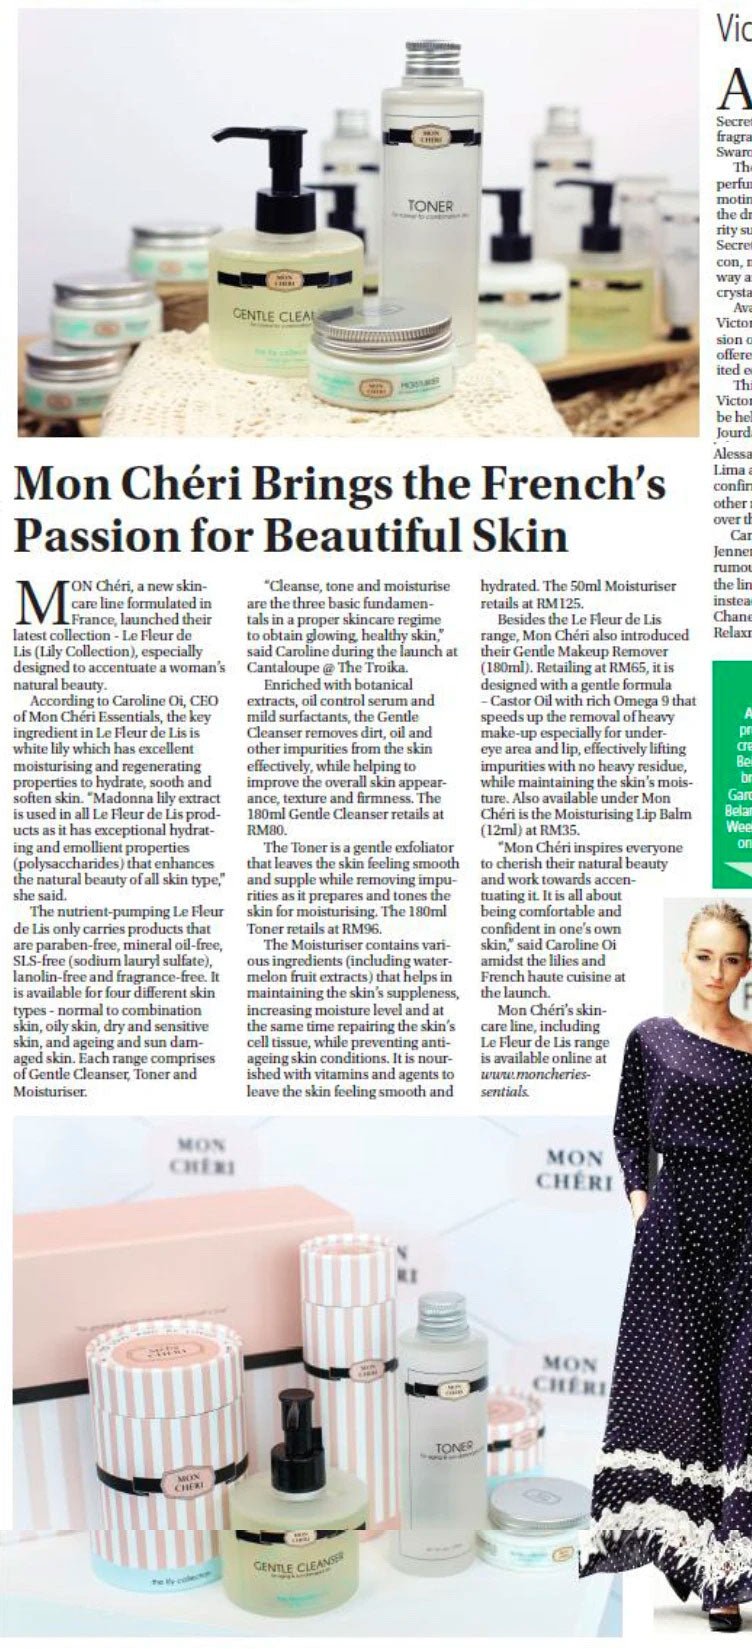 Mon Chéri Brings the French’s Passion for Beautiful Skin (New Sarawak Tribune, Style) - 19 November 2014